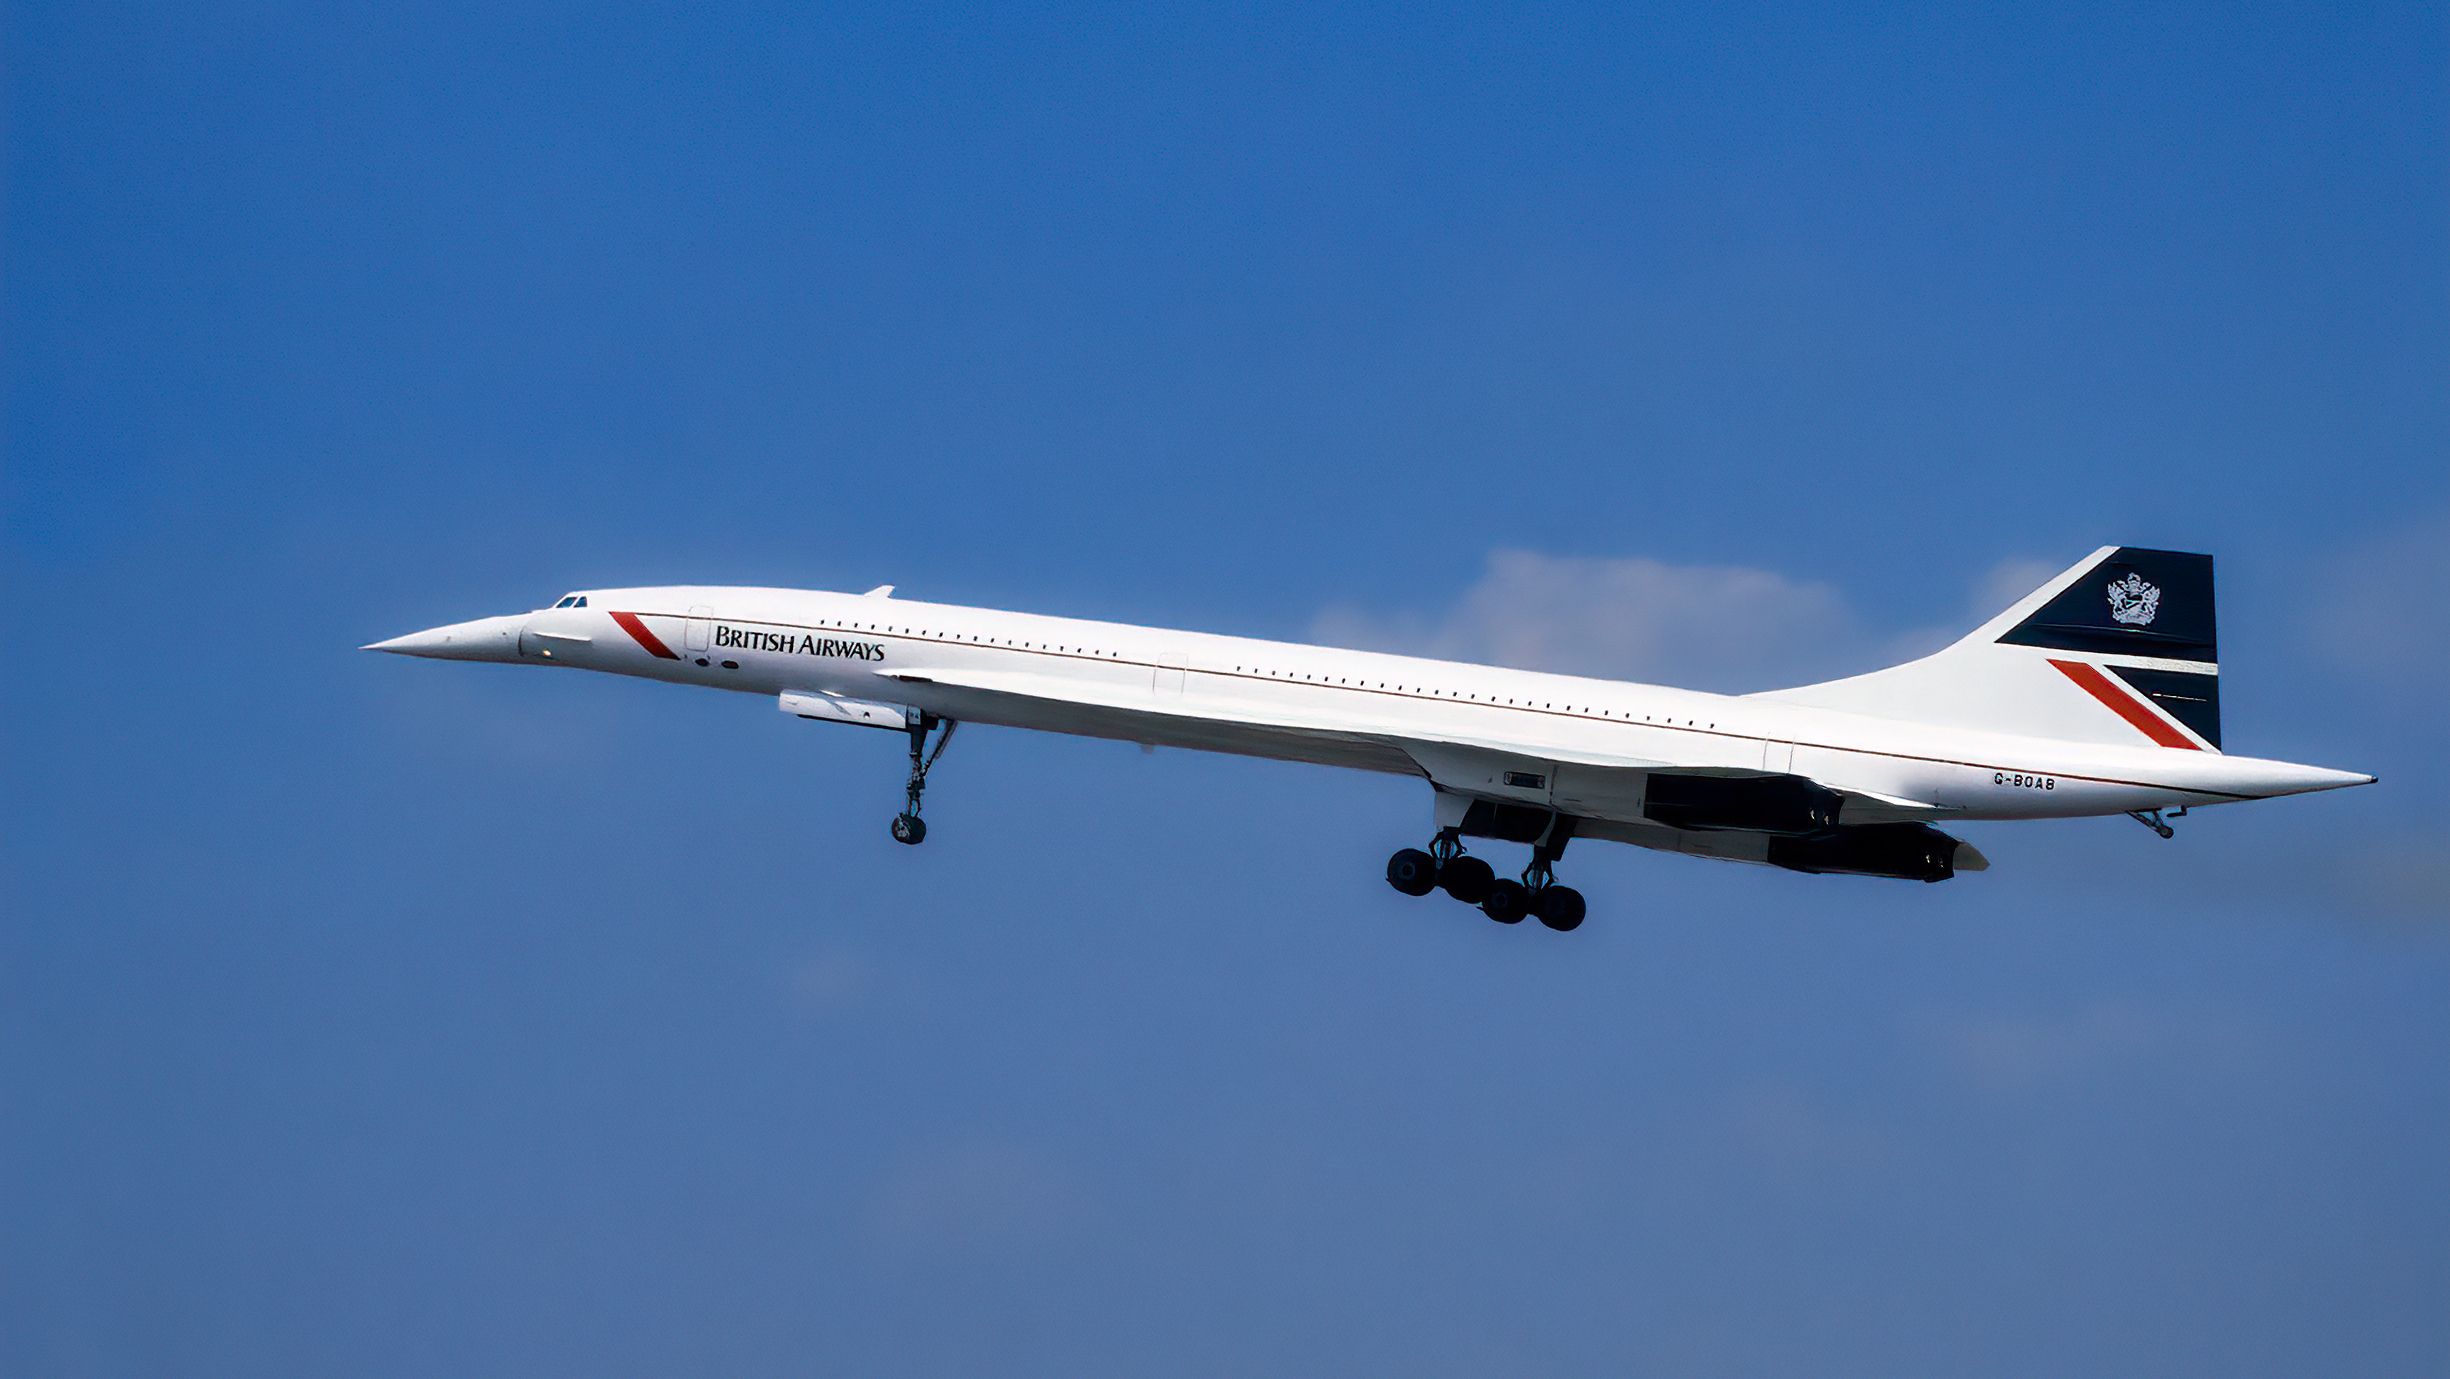 What it was really like to fly on Concorde